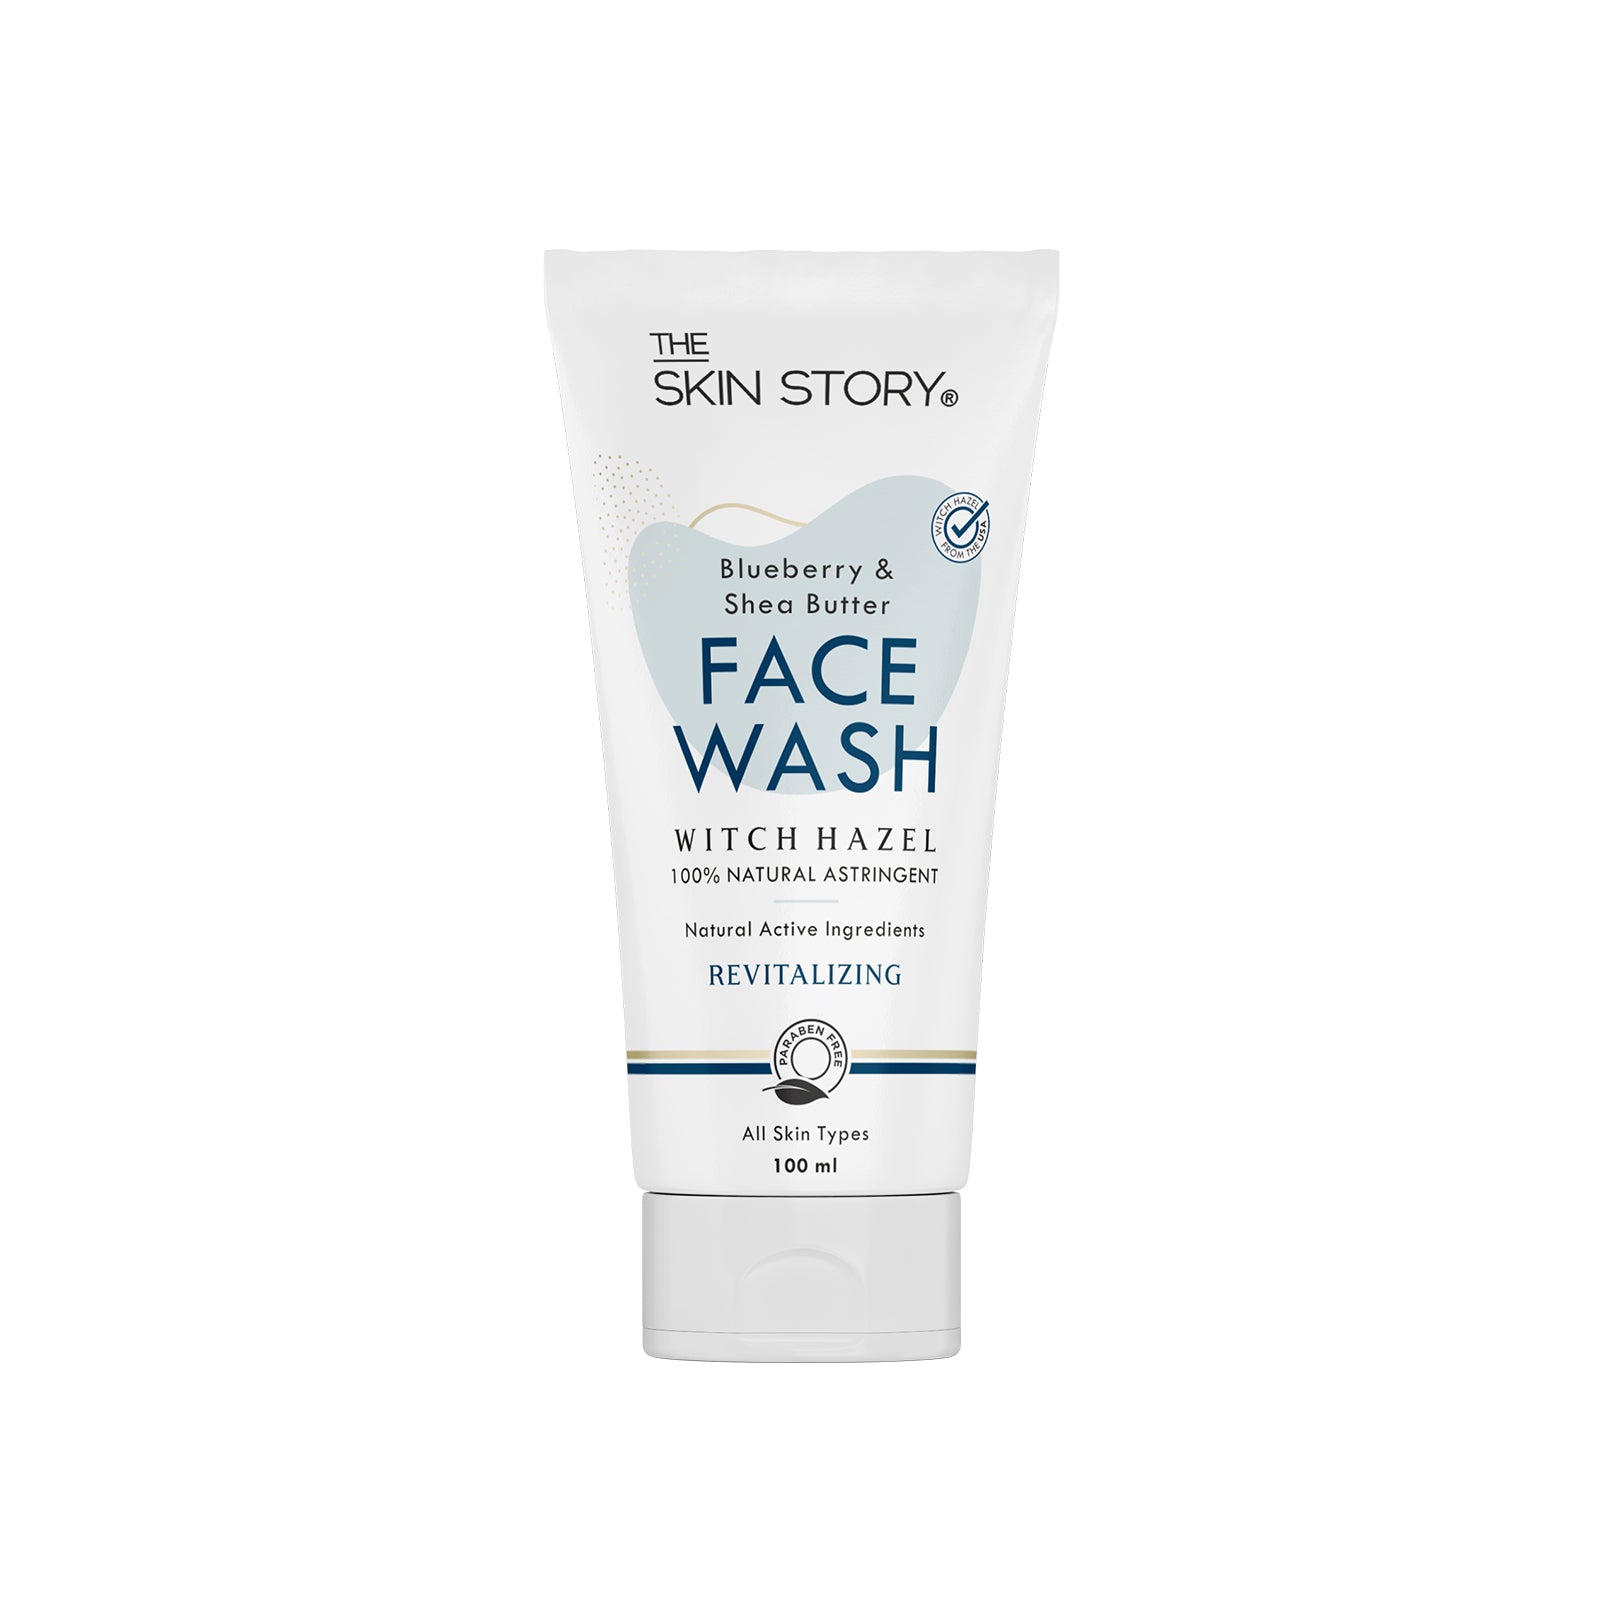 The Skin Story Deep Cleansing Facewash | Face Cleanser | Gentle Skin Cleanser | All Skin Types | Witch Hazel, Blueberry, Shea Butter | 100ml